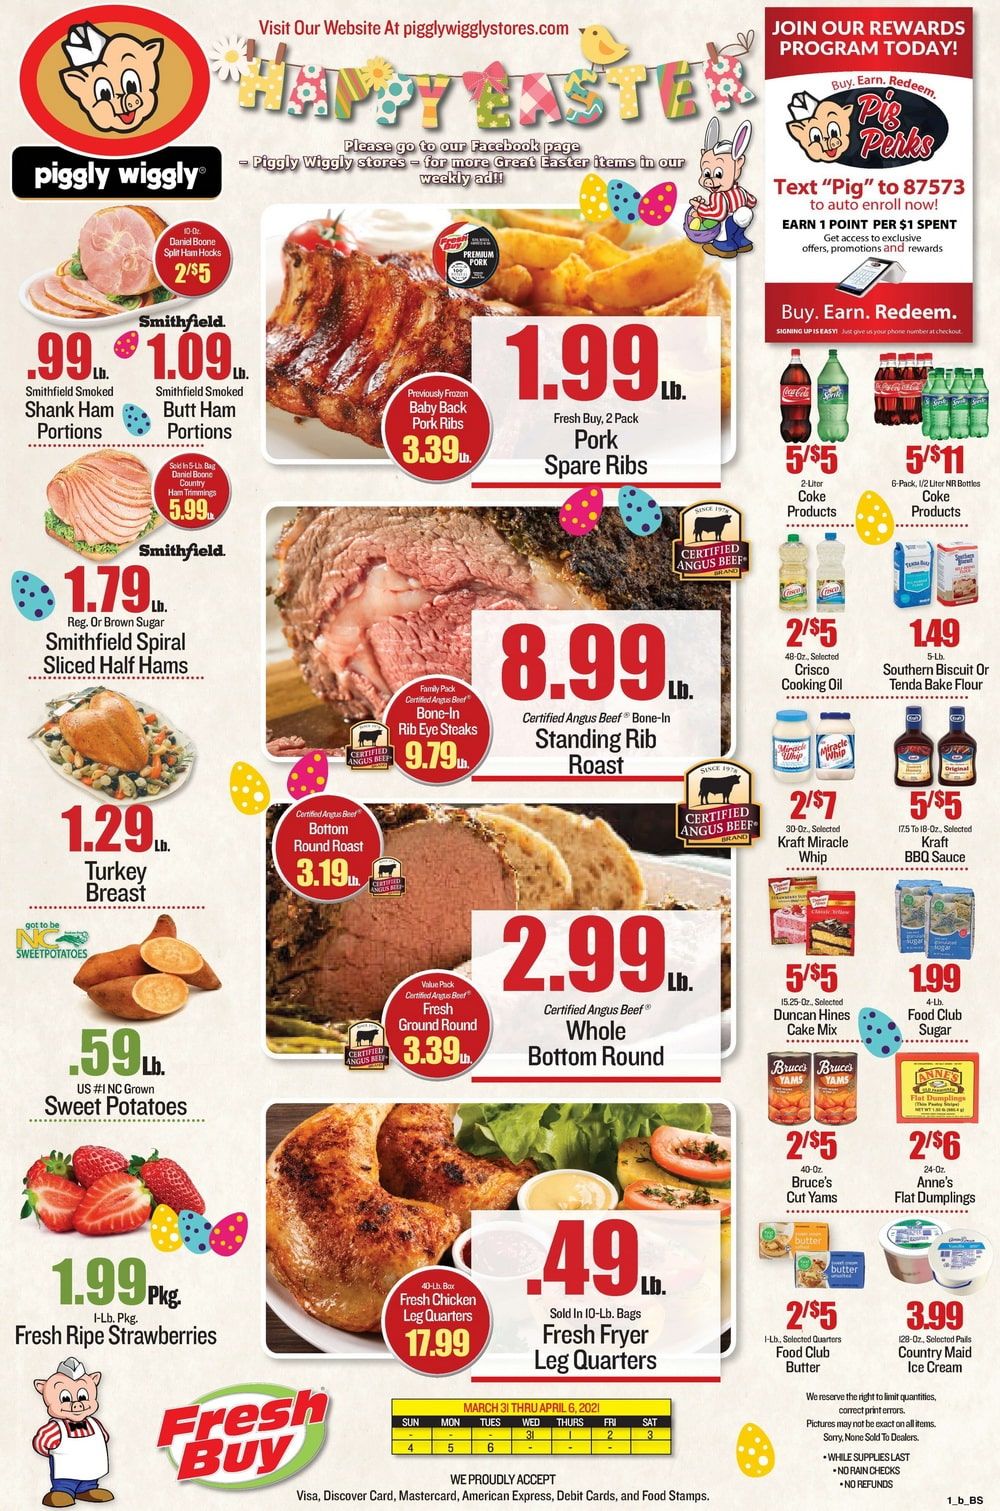 Piggly Wiggly Weekly Ad Mar 31 – Apr 06, 2021